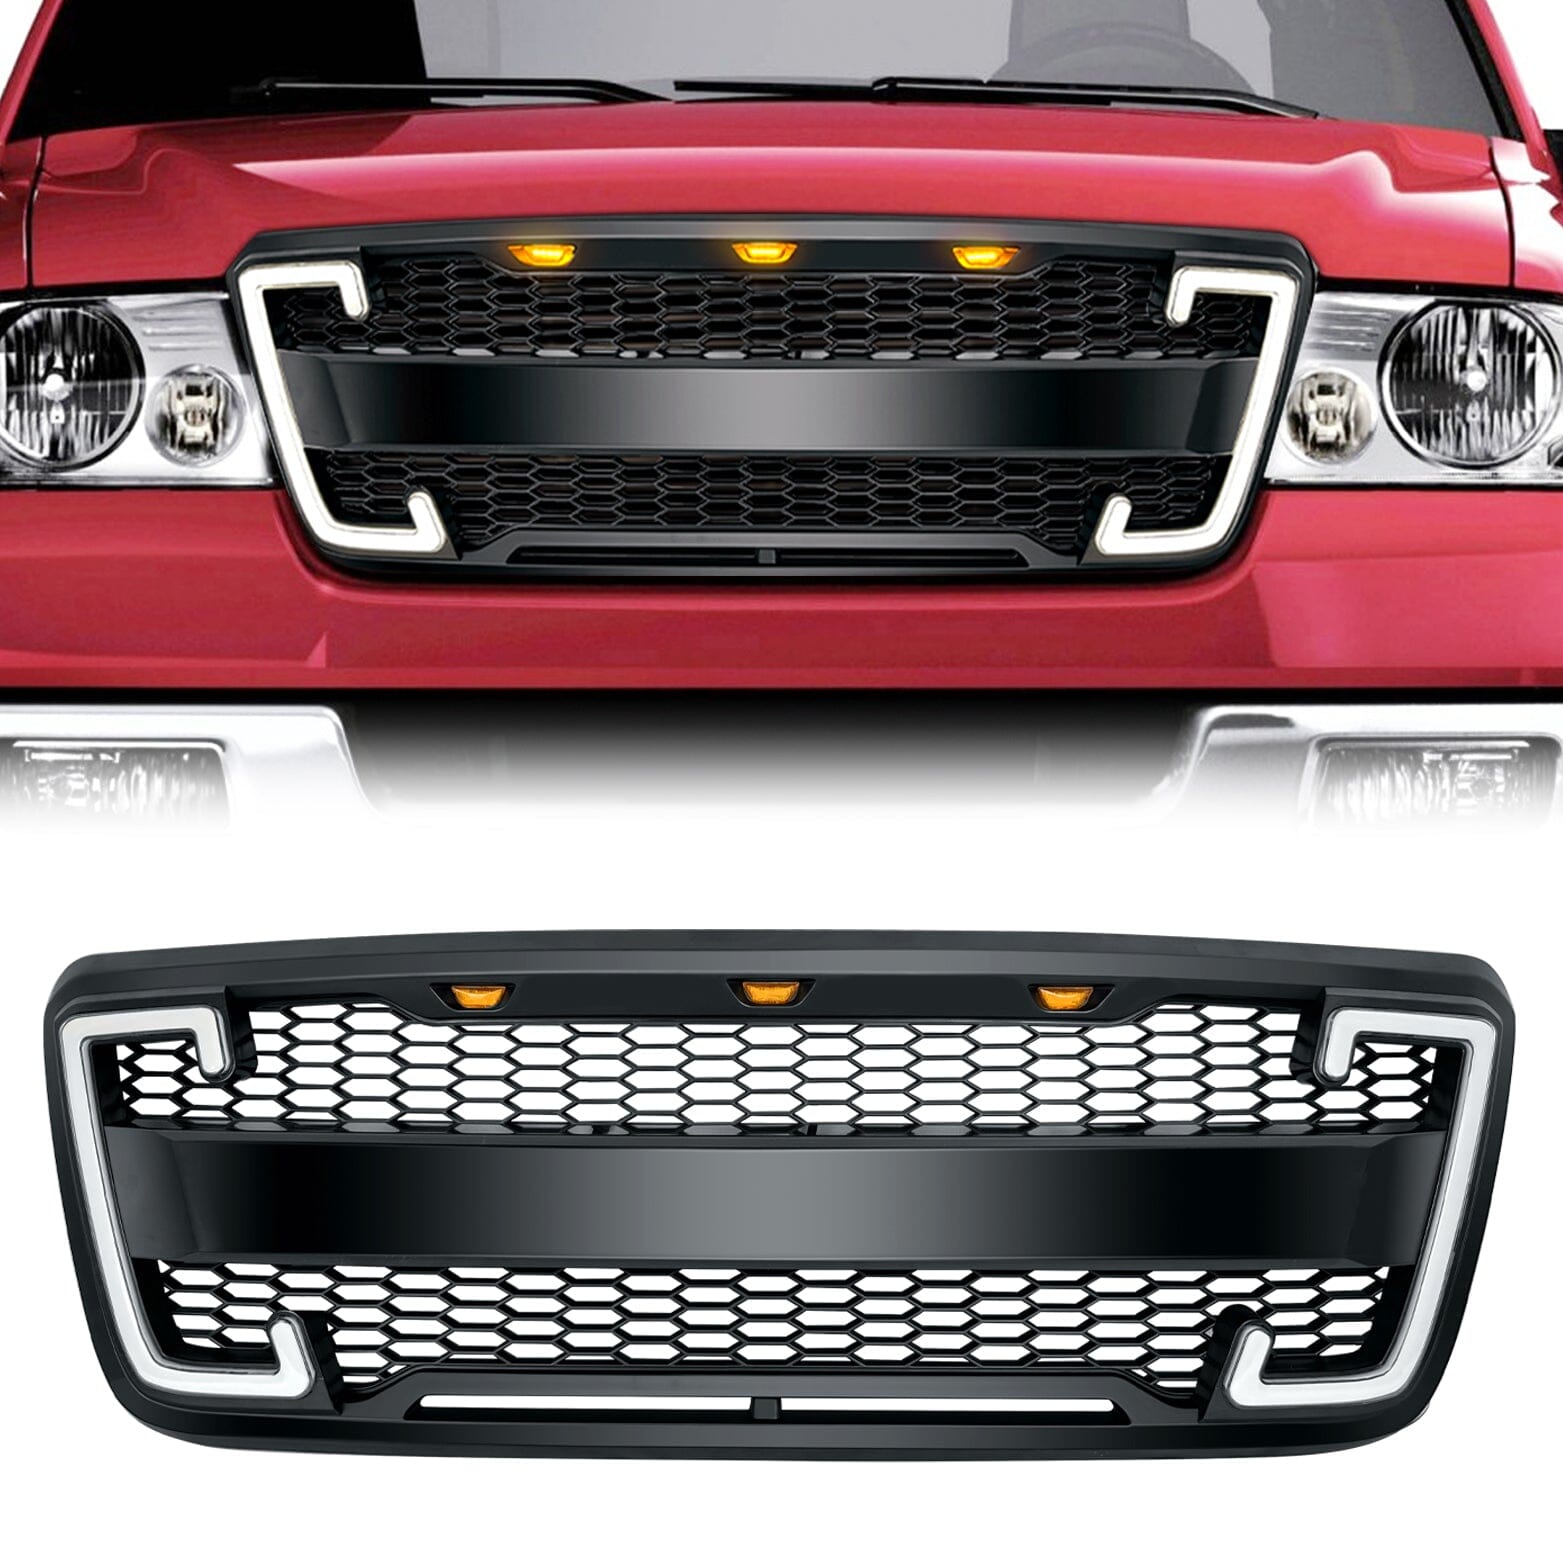 04-08 Ford F150 Raptor Style Mesh Grille w/DRL & Turn Signal Lights